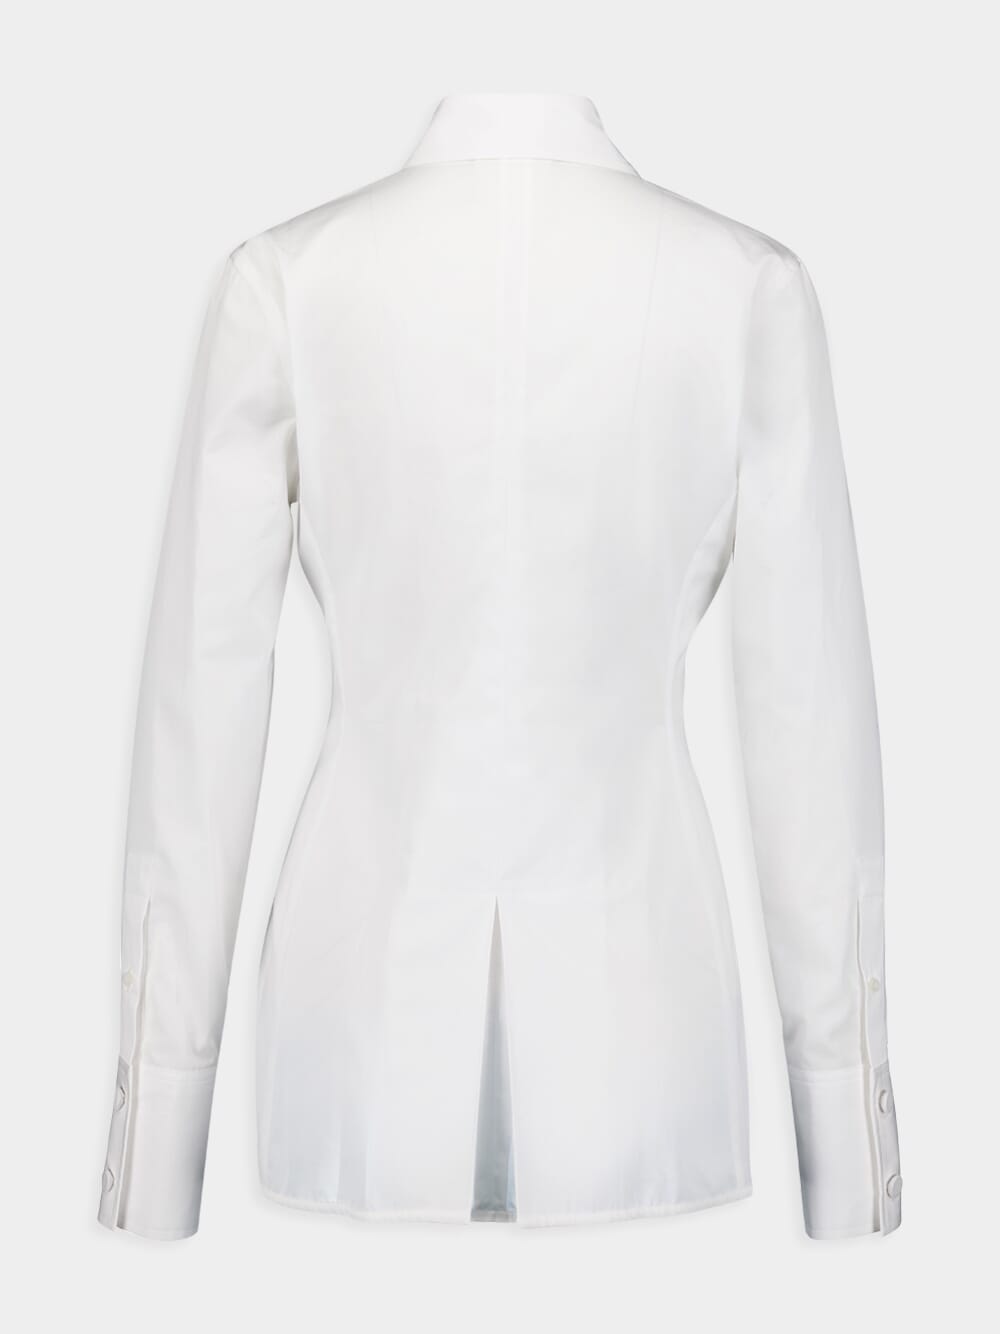 GivenchyPleated Effect Popelin Cotton Shirt at Fashion Clinic